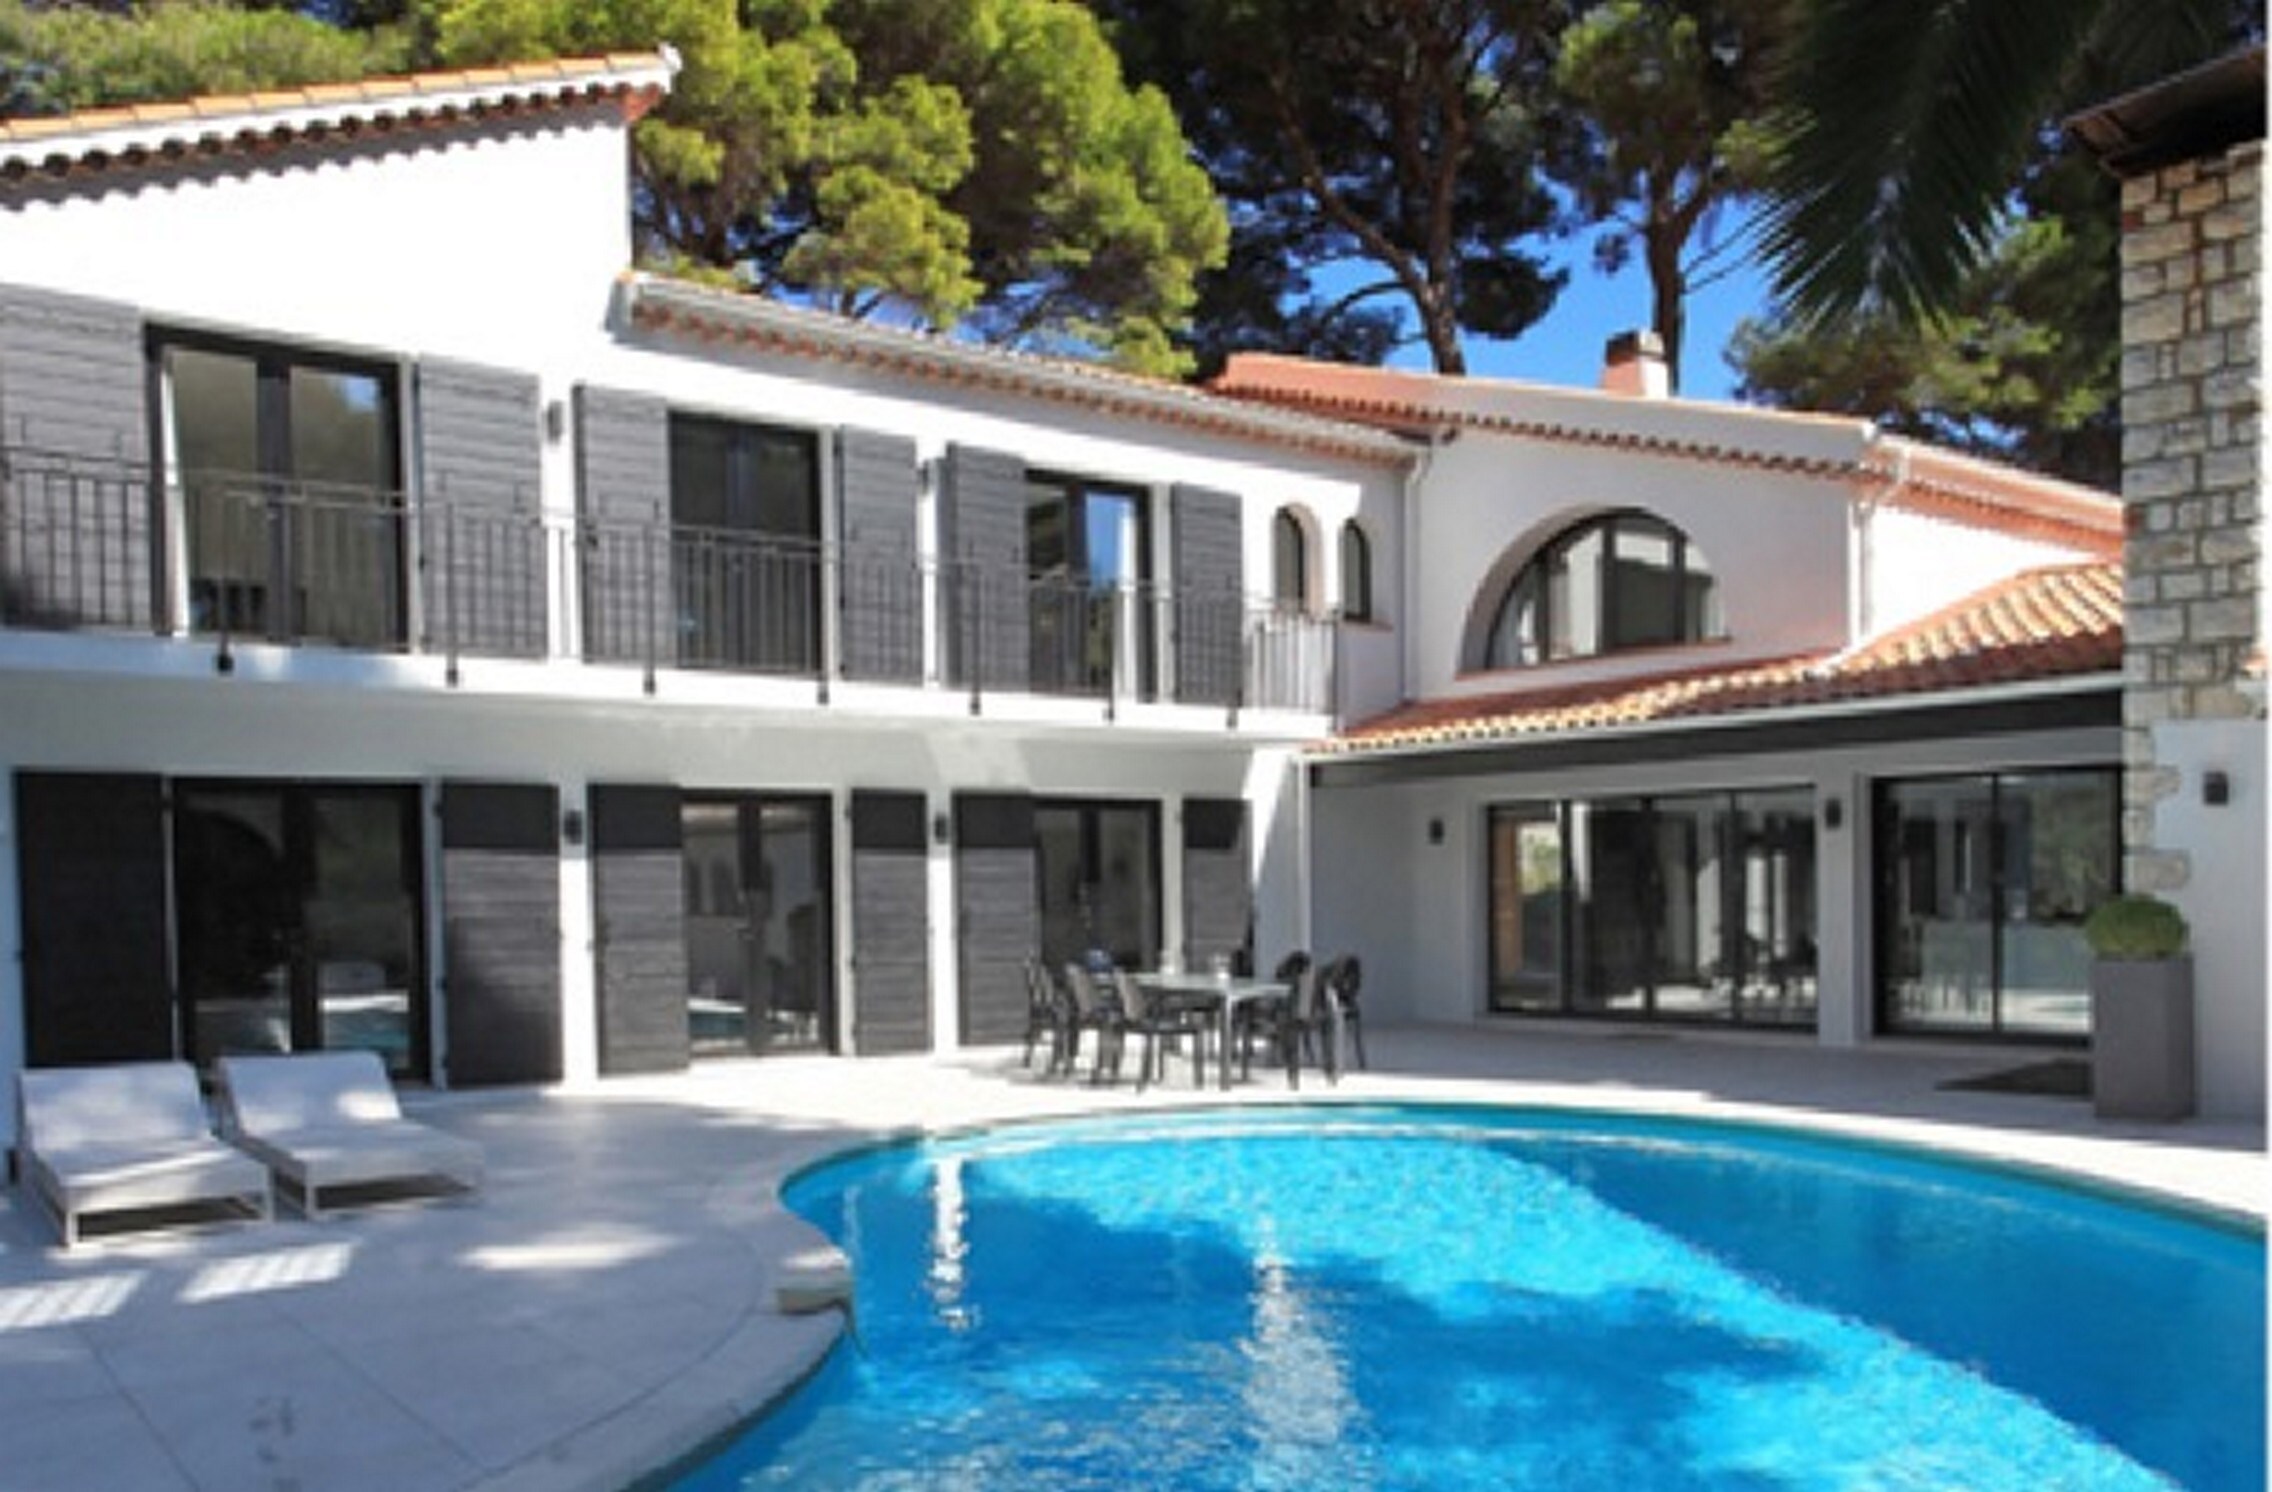 Property Image 2 - Stunning property on the Cap d’Antibes with pool, at walking distance to the beach